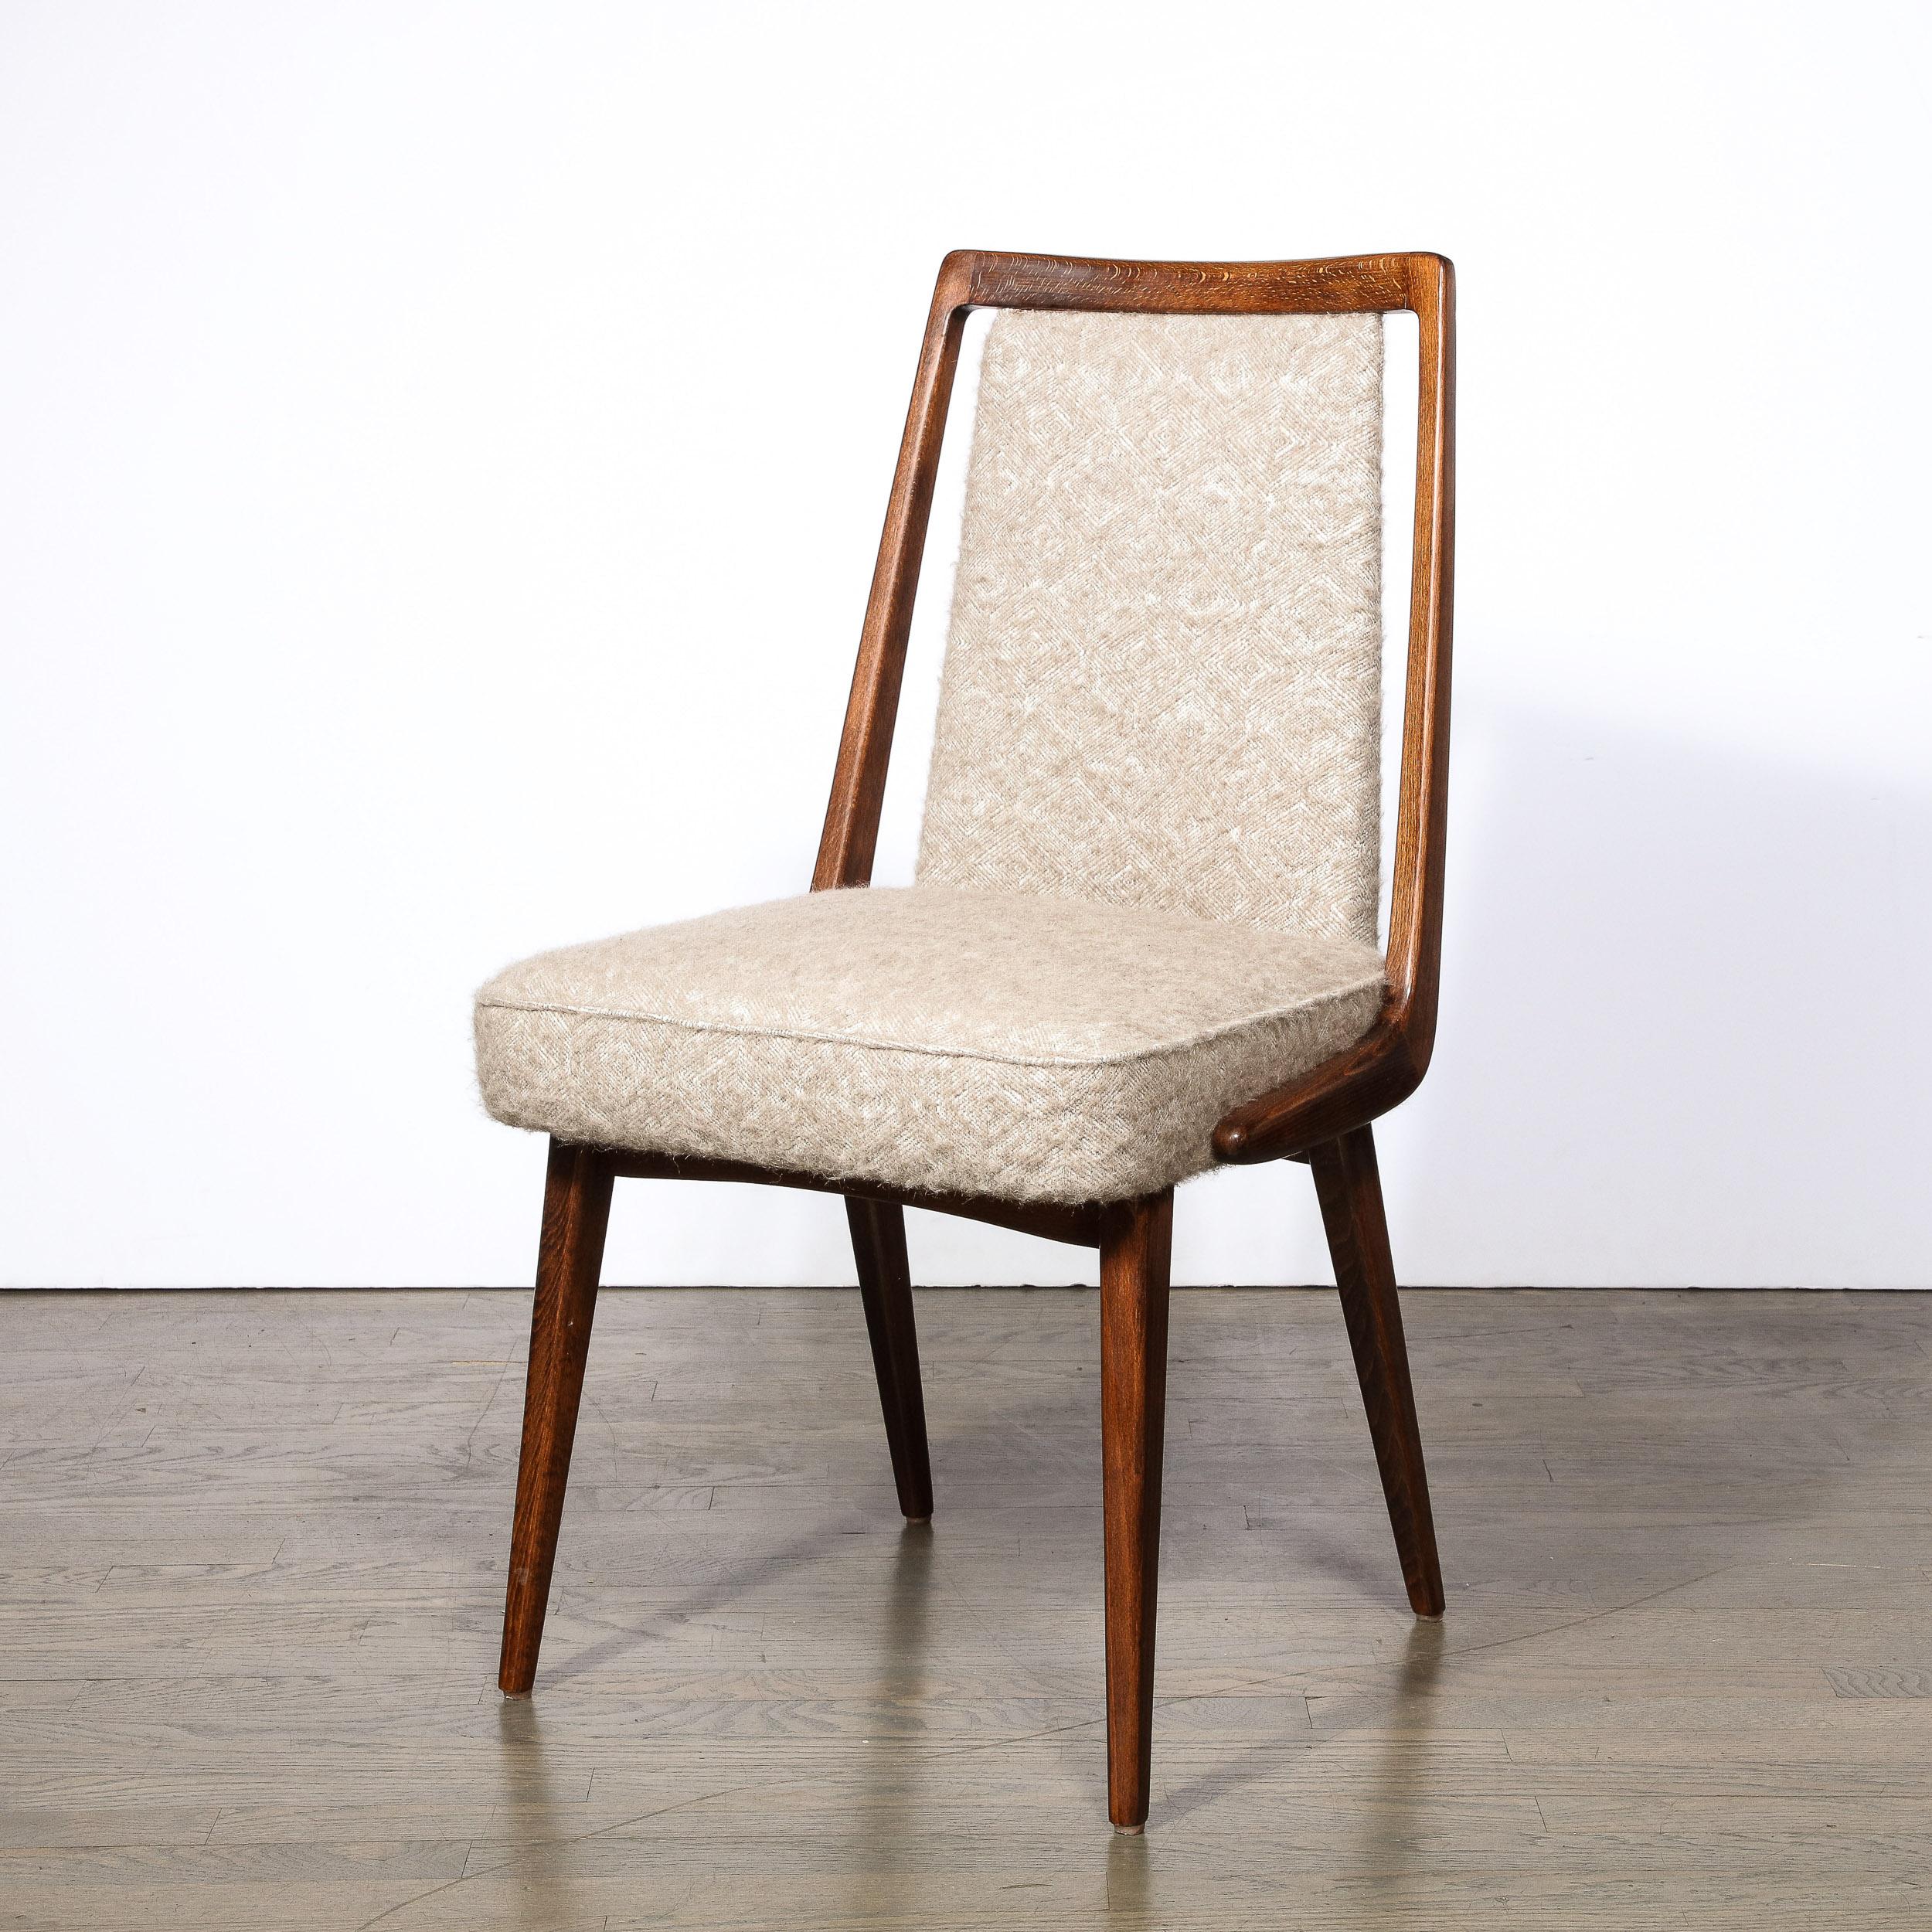 American Midcentury Modernist Sculptural Frame Back Chair in Walnut & Holly Hunt Fabric